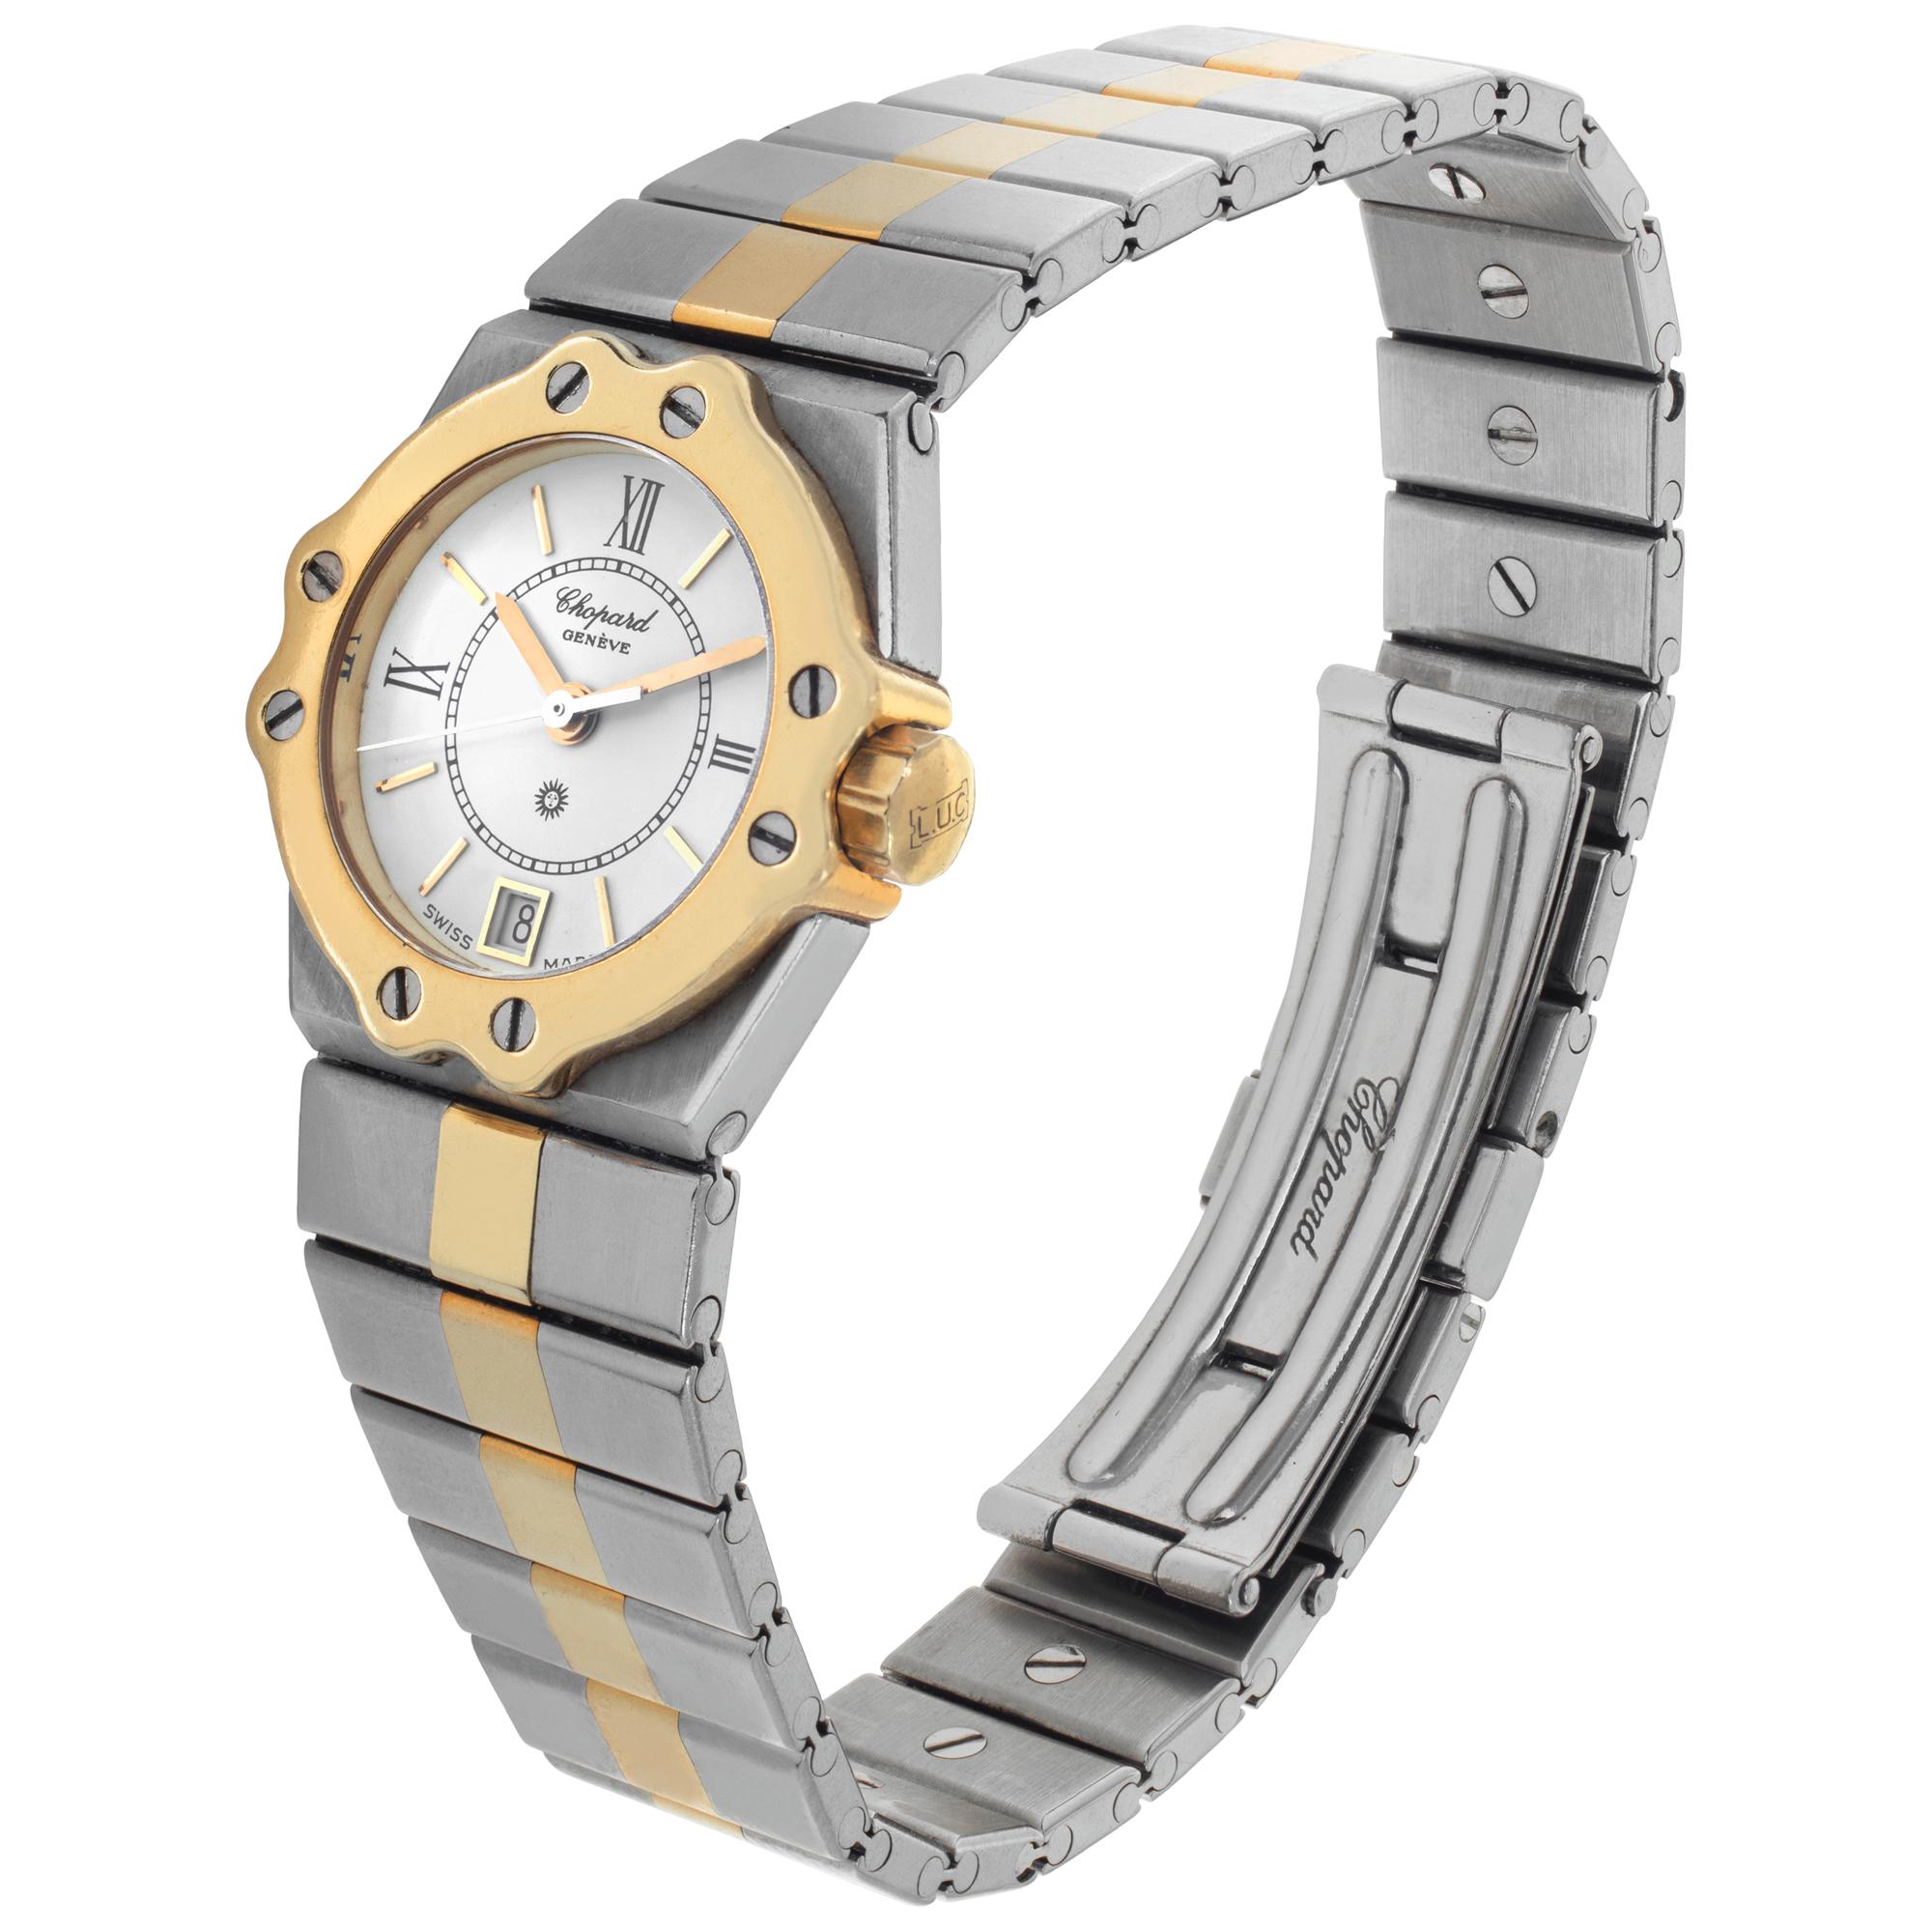 Chopard St. Moritz in stainless steel and gold plate. Quartz with date. 23 mm case size. Ref 8024. Fine Pre-owned Chopard Watch. Certified preowned Classic Chopard St. Moritz 8024 watch is made out of Stainless steel on a Stainless Steel bracelet